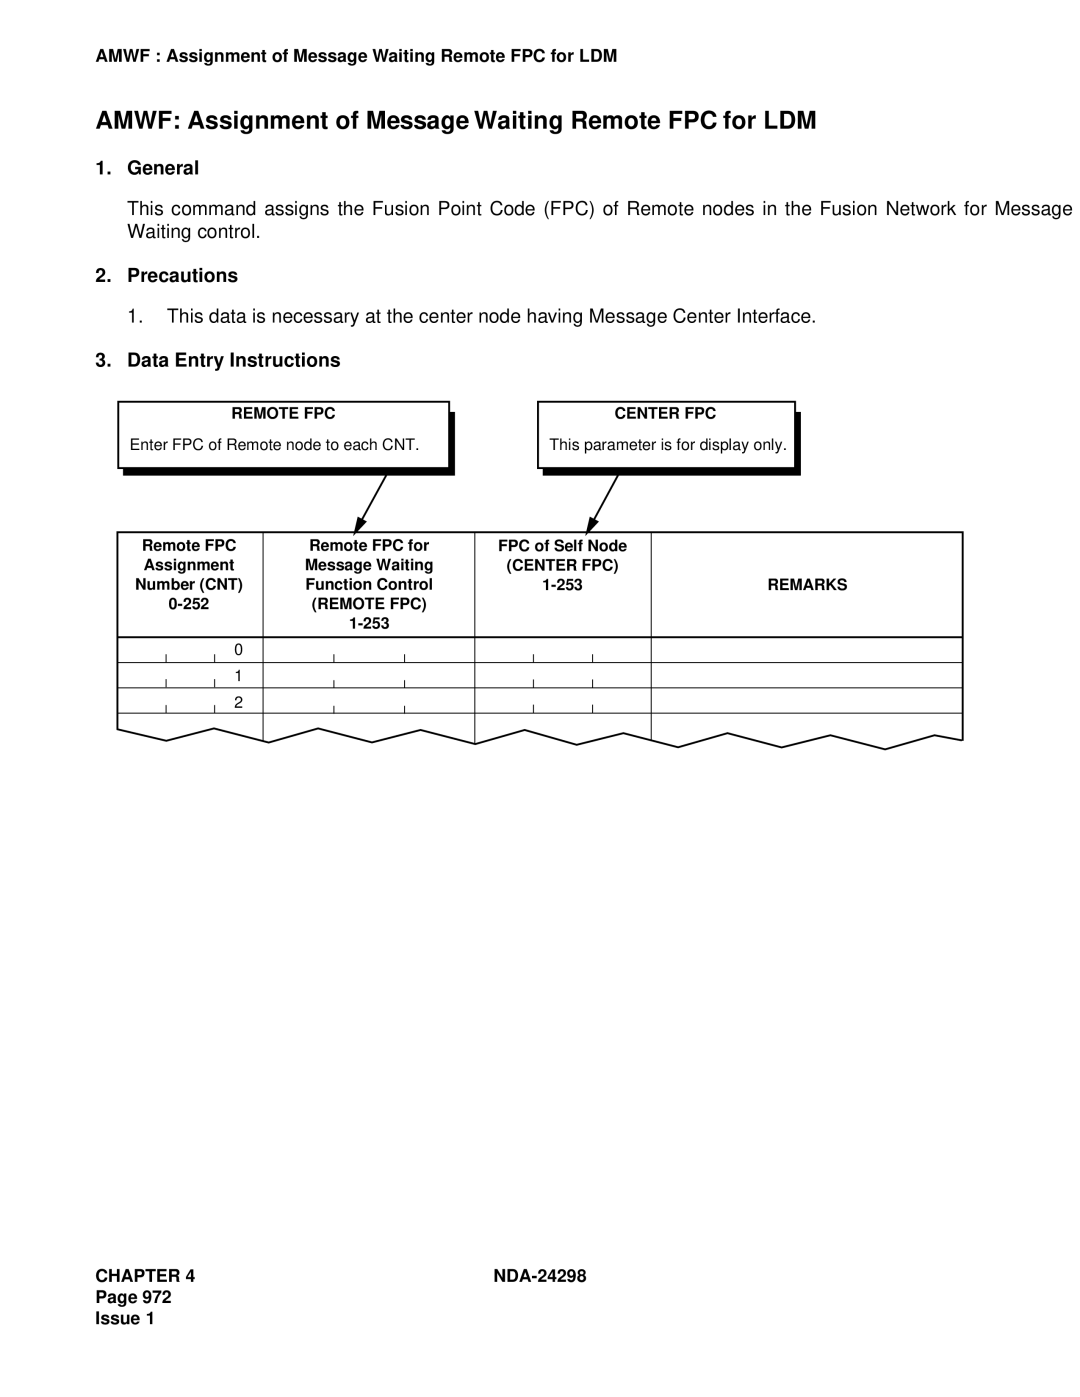 NEC NDA-24298 manual Amwf Assignment of Message Waiting Remote FPC for LDM 